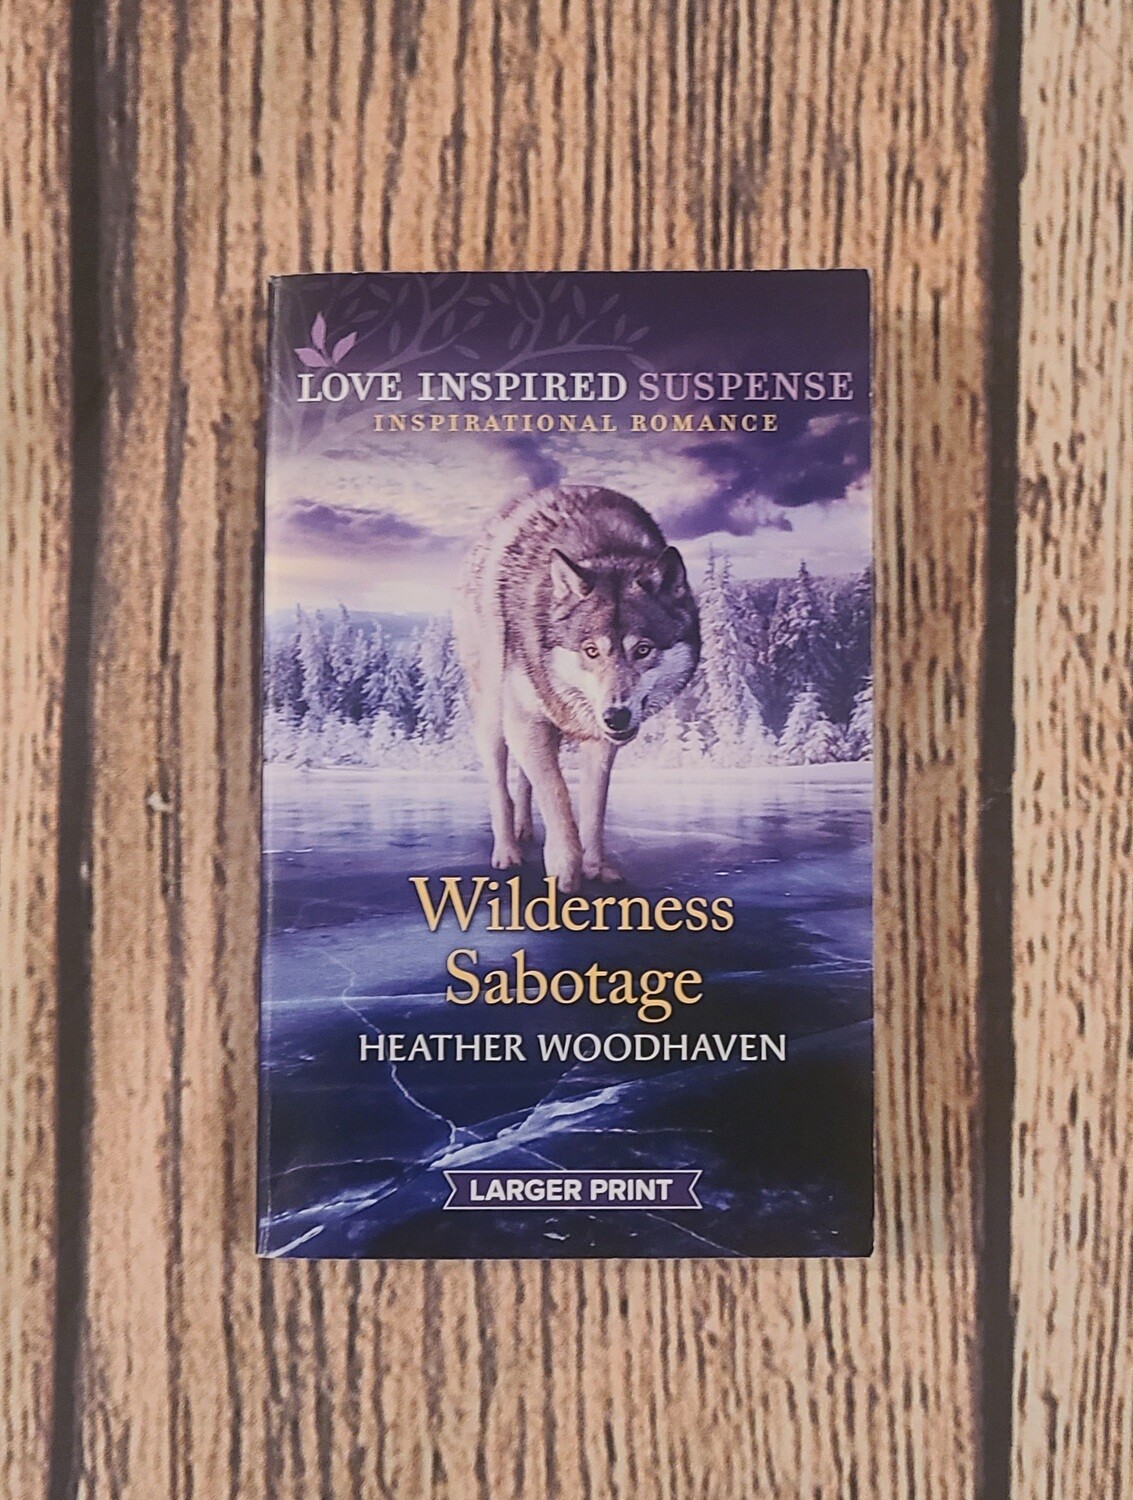 Wilderness Sabotage by Heather Woodhaven - Larger Print - Good Condition